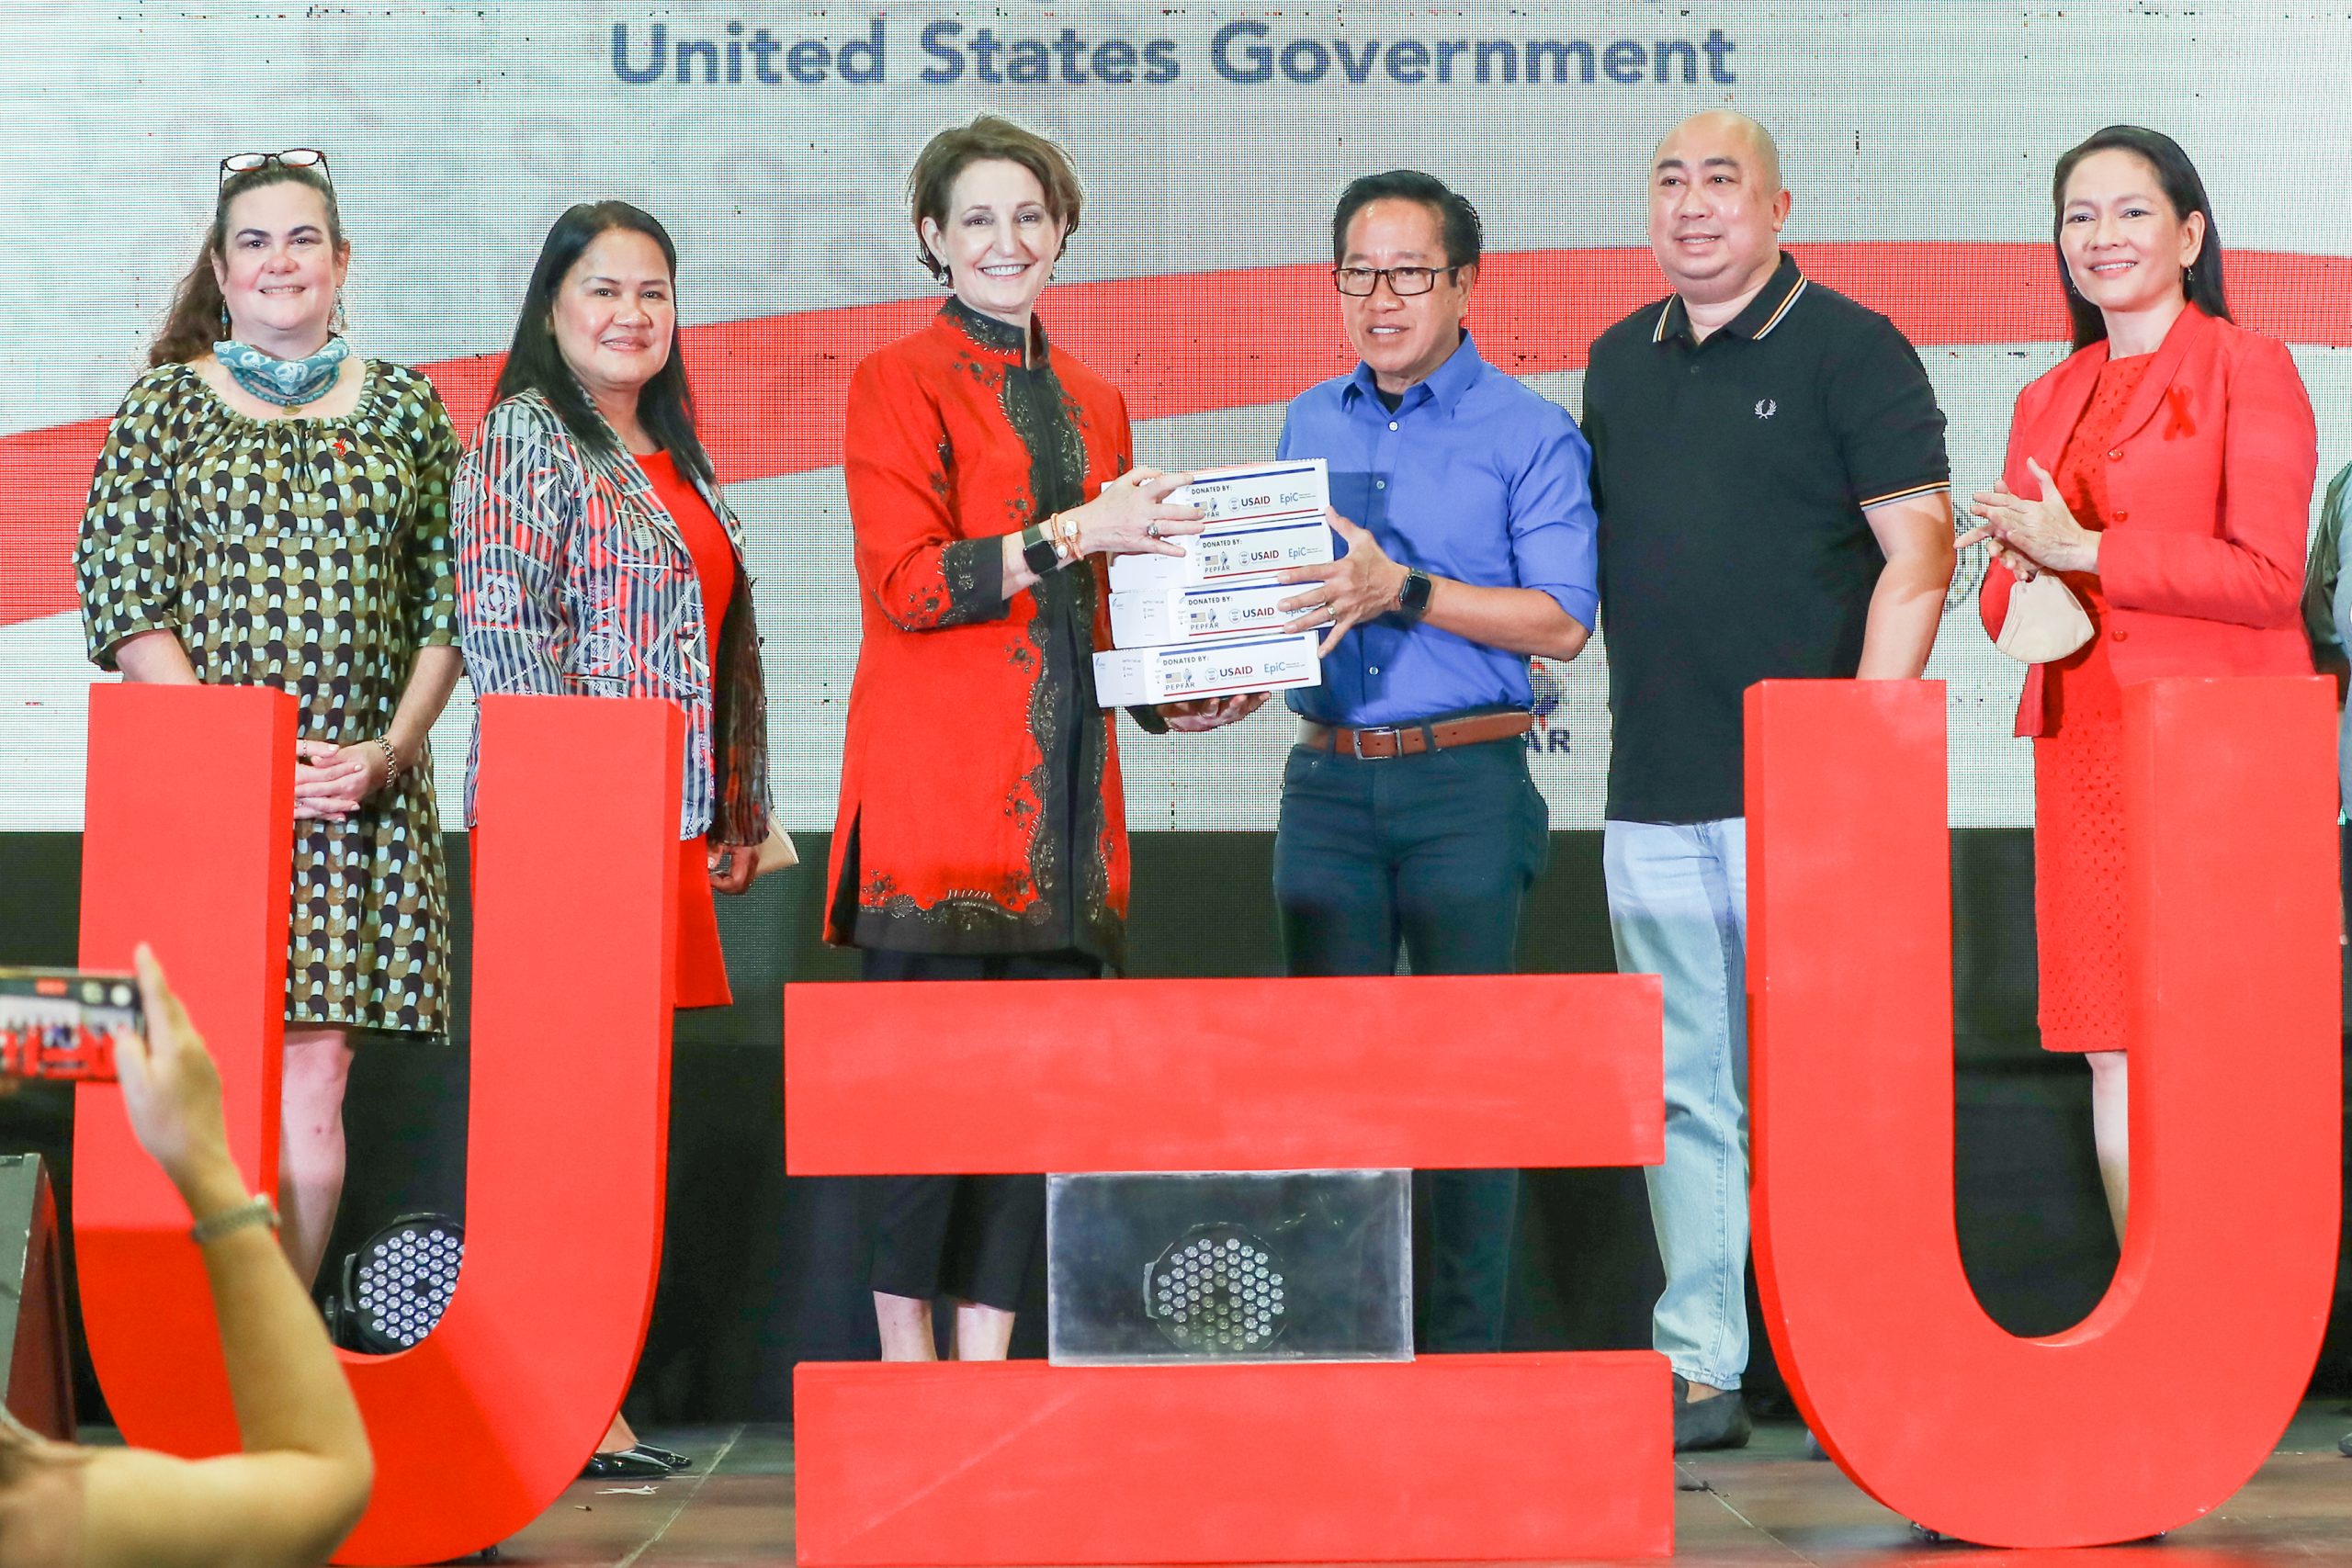 Turn over of HIV viral load cartridges donation